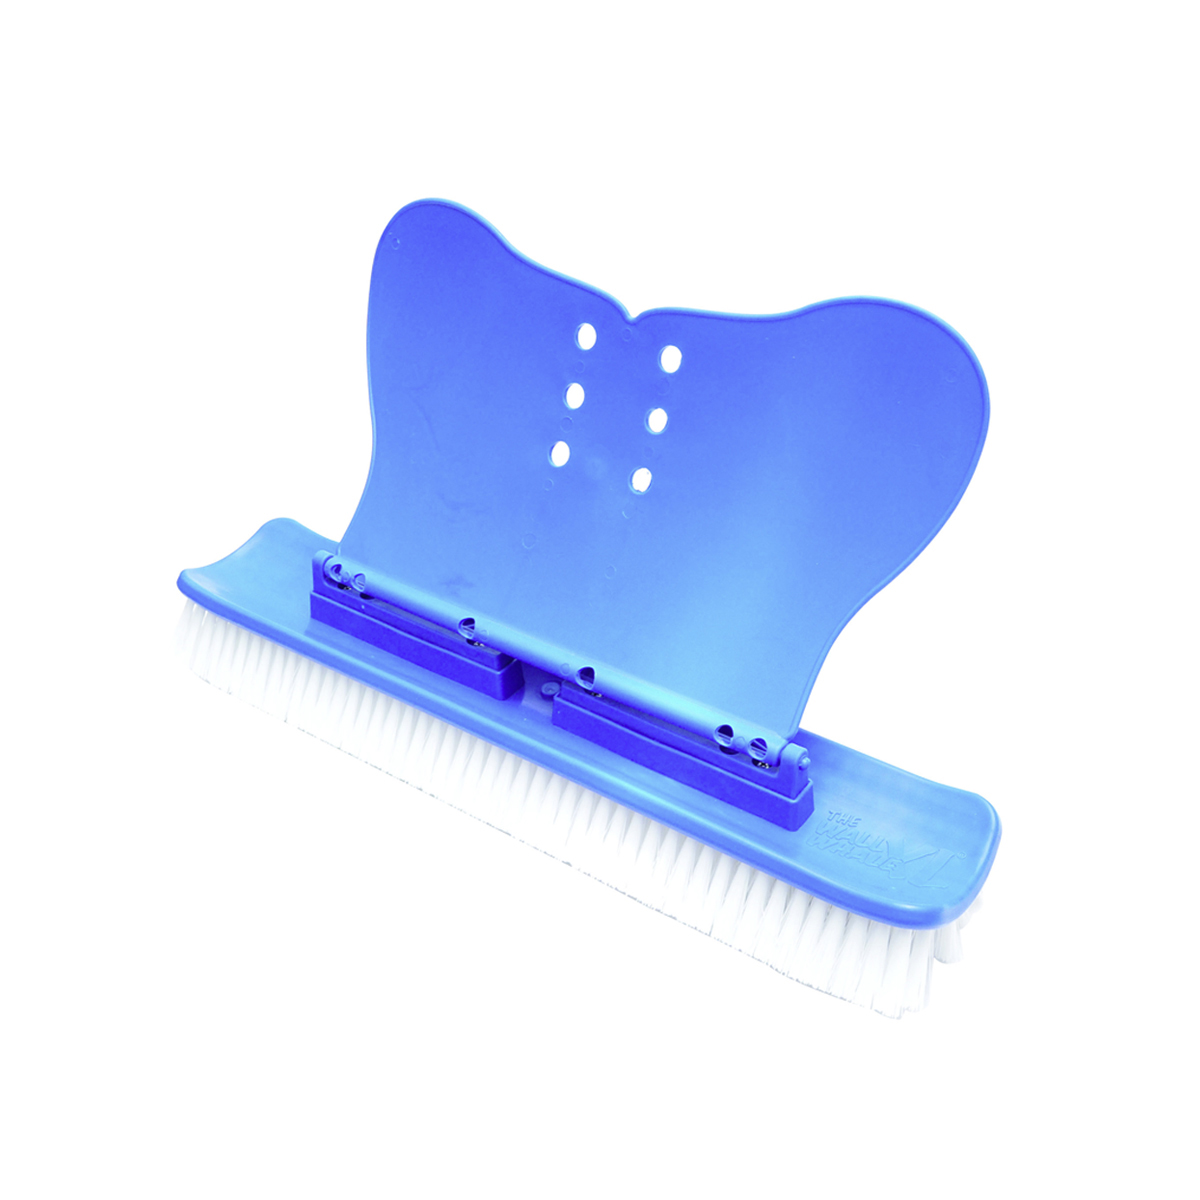 Smart Wall Brush "Wal Type" large PP blue 20" Smart Wall Brush "Wal Type" large PP blue 20"